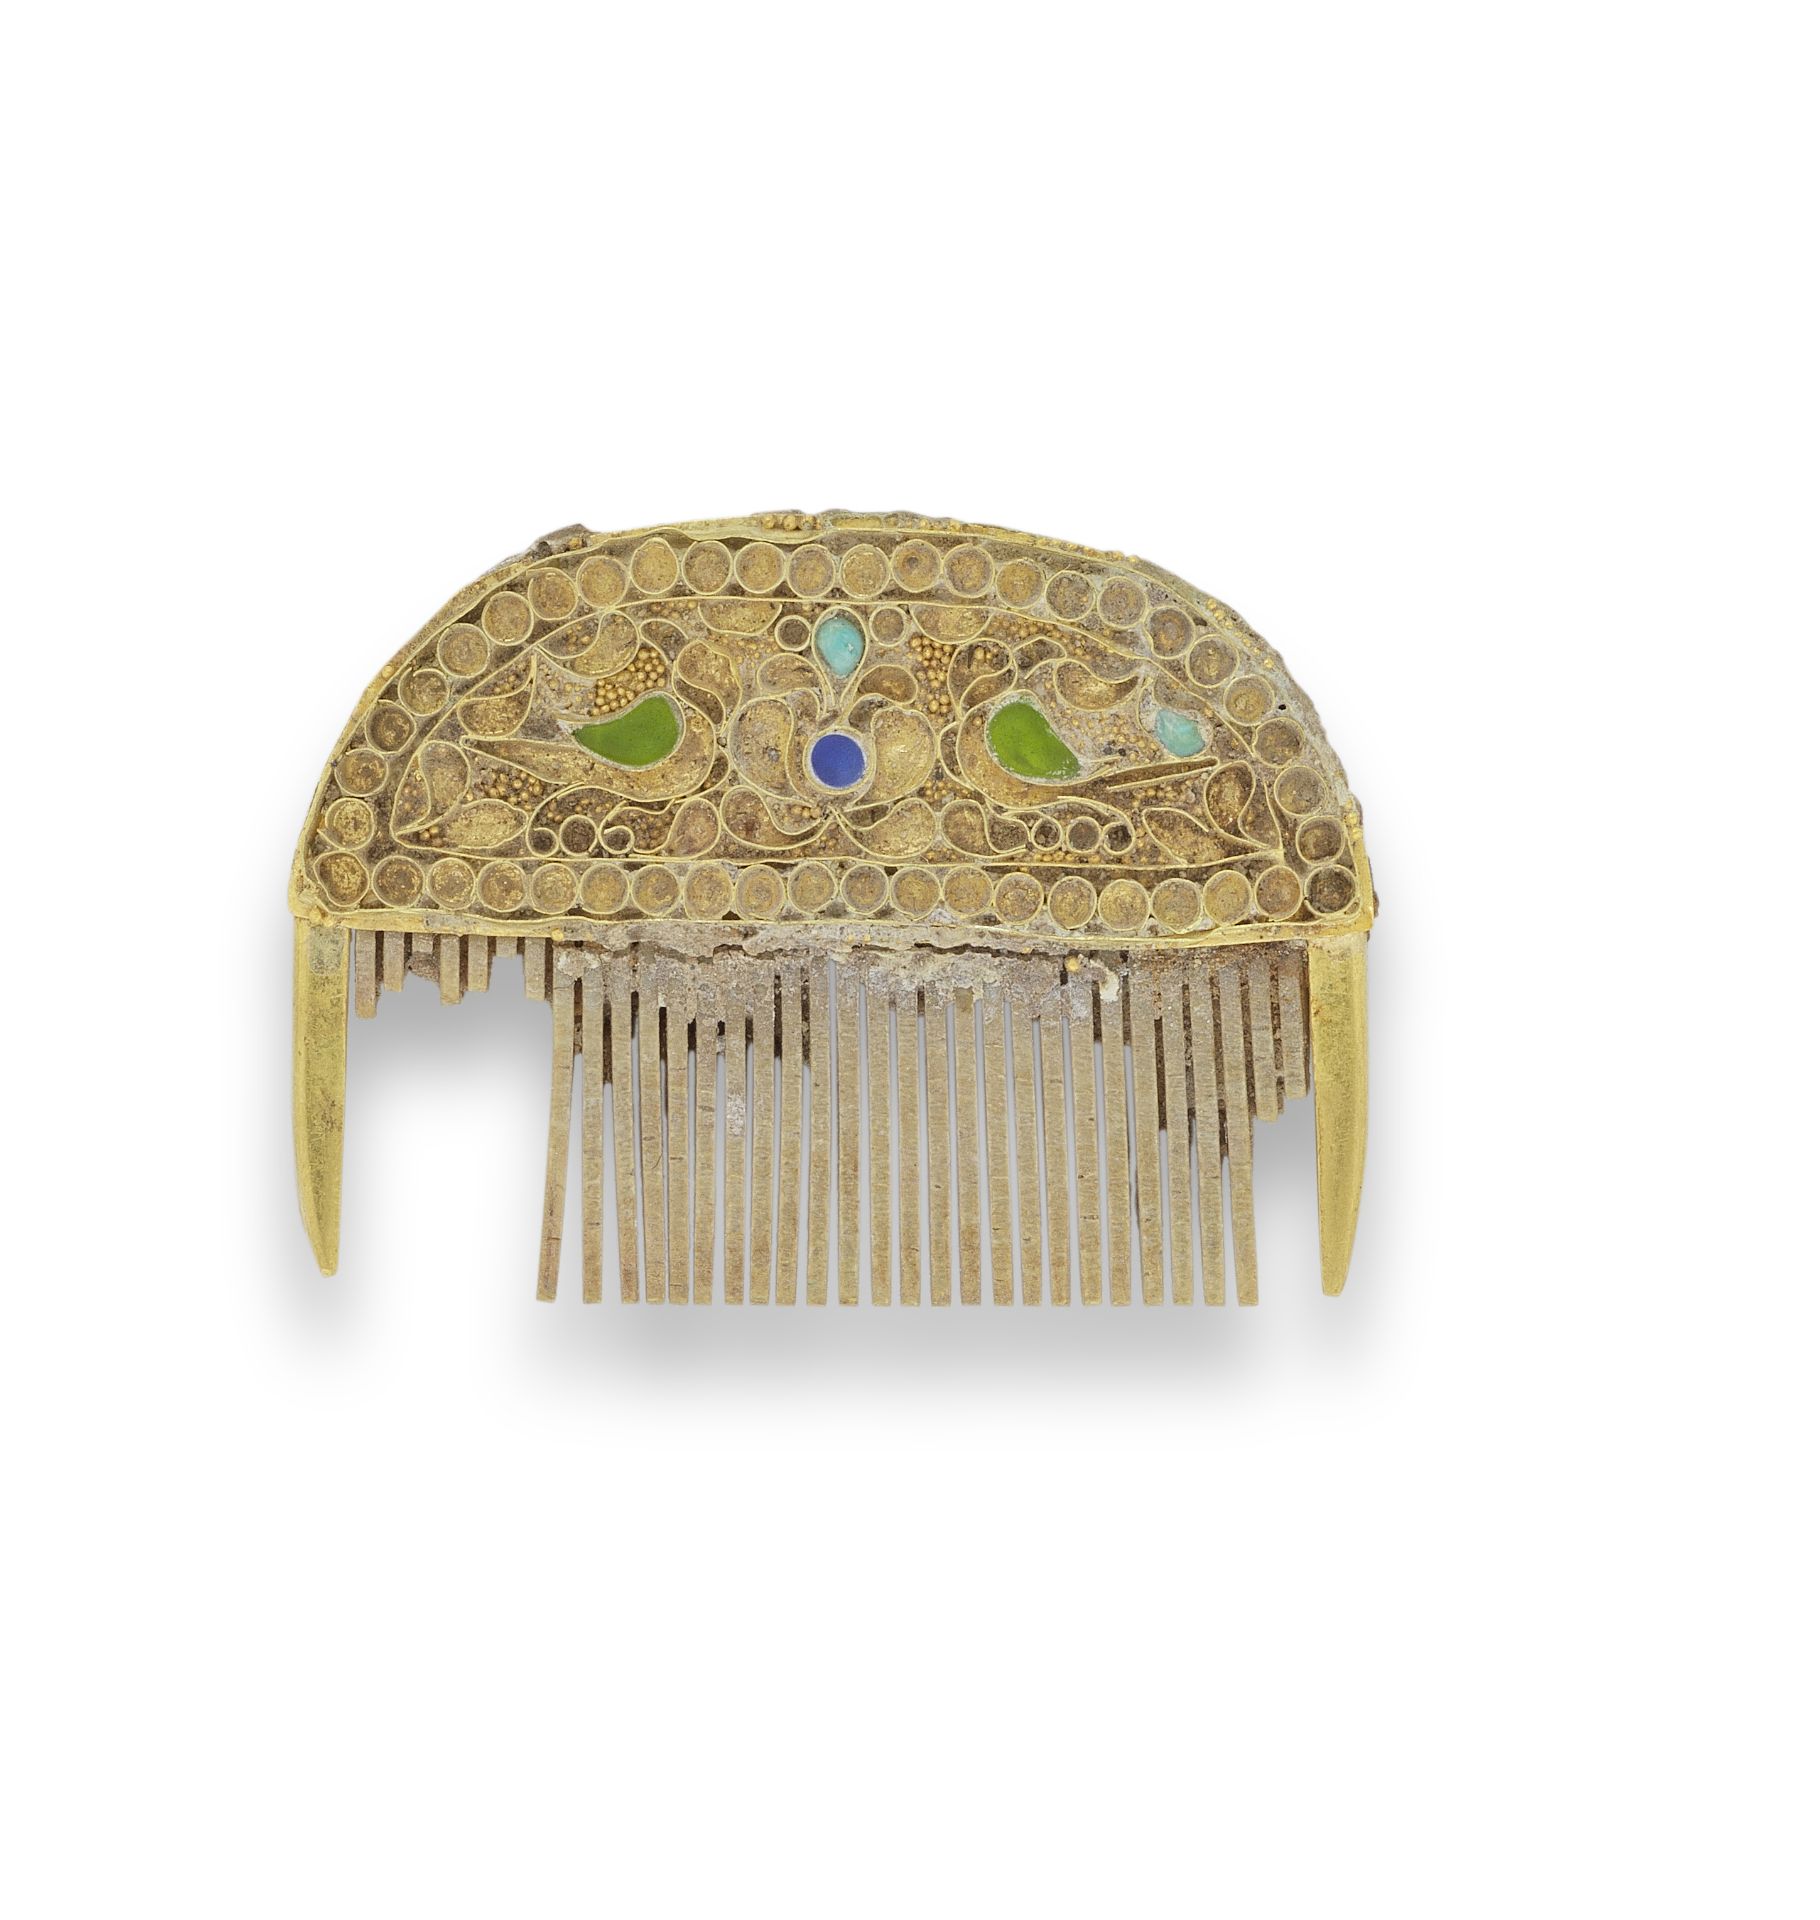 A RARE GOLD AND BONE-INLAID COMB Tang Dynasty or earlier